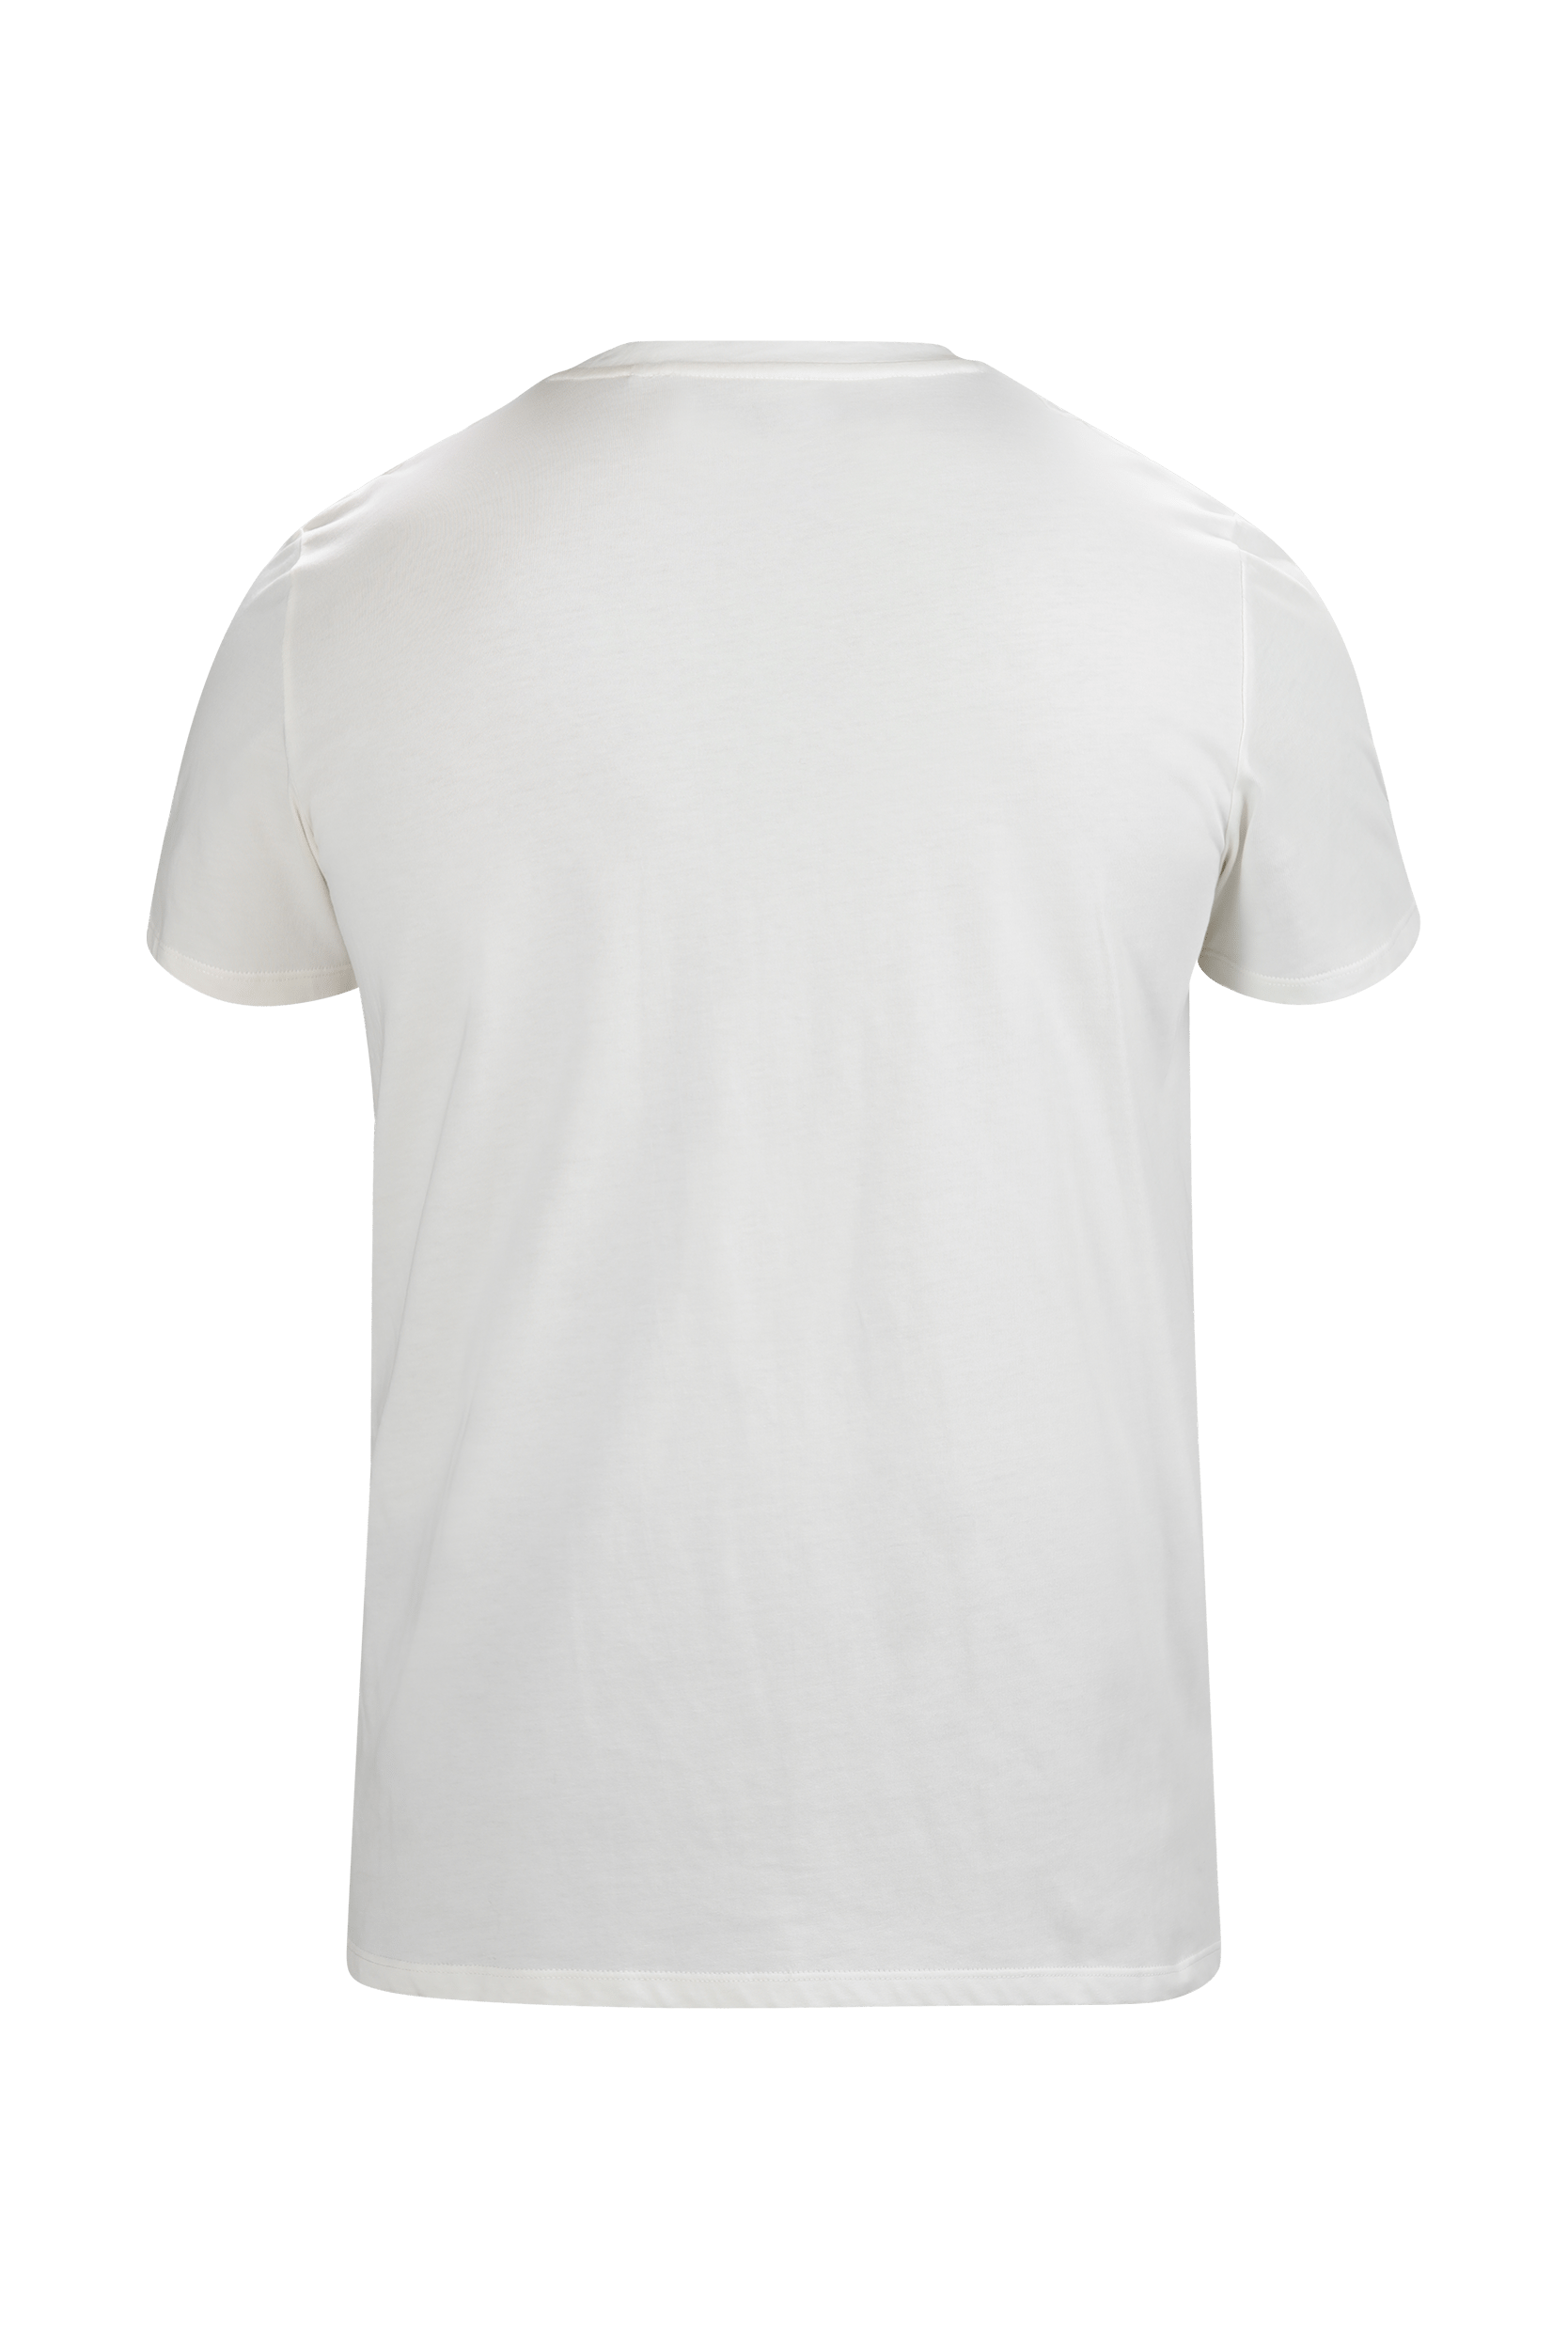 White Tshirt Wallpapers - Top Free White Tshirt Backgrounds ...